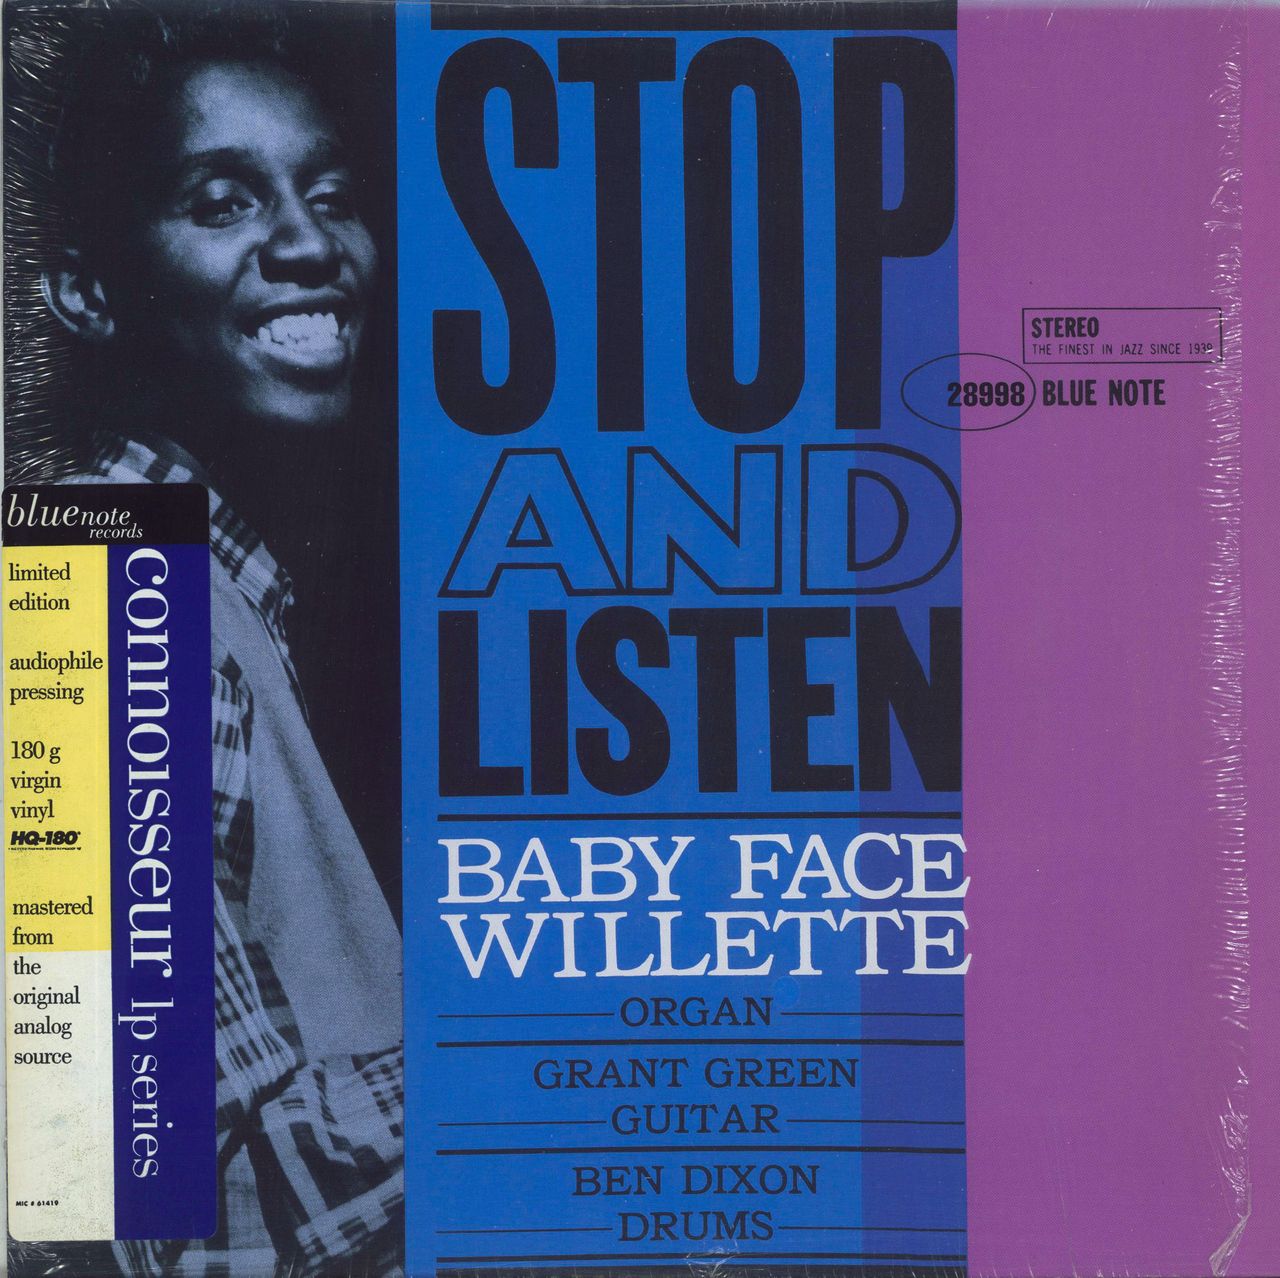 'Baby Face' Willette